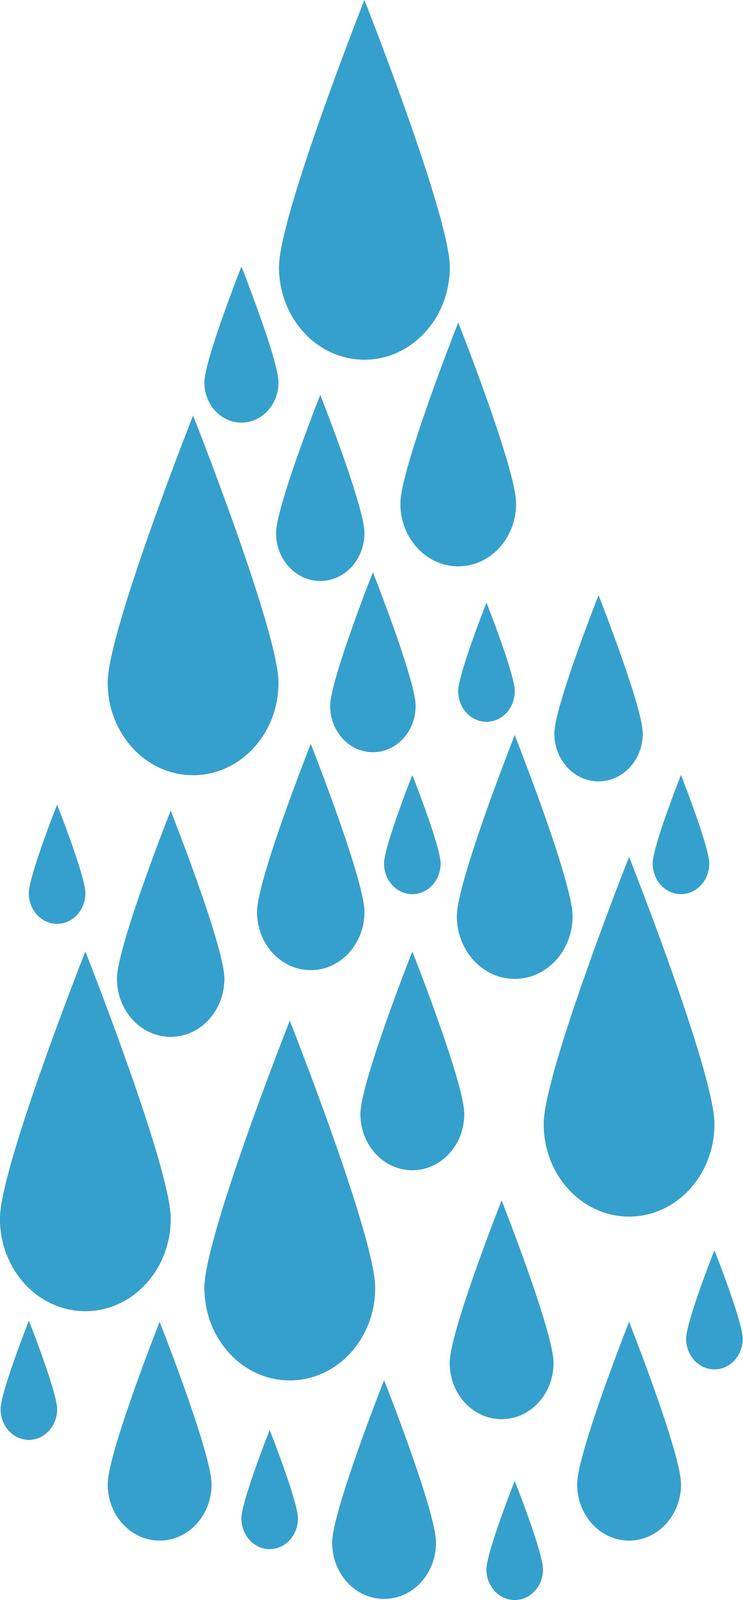 Water droplet icon composed of a collection of water droplets. Vector. by illust_monster